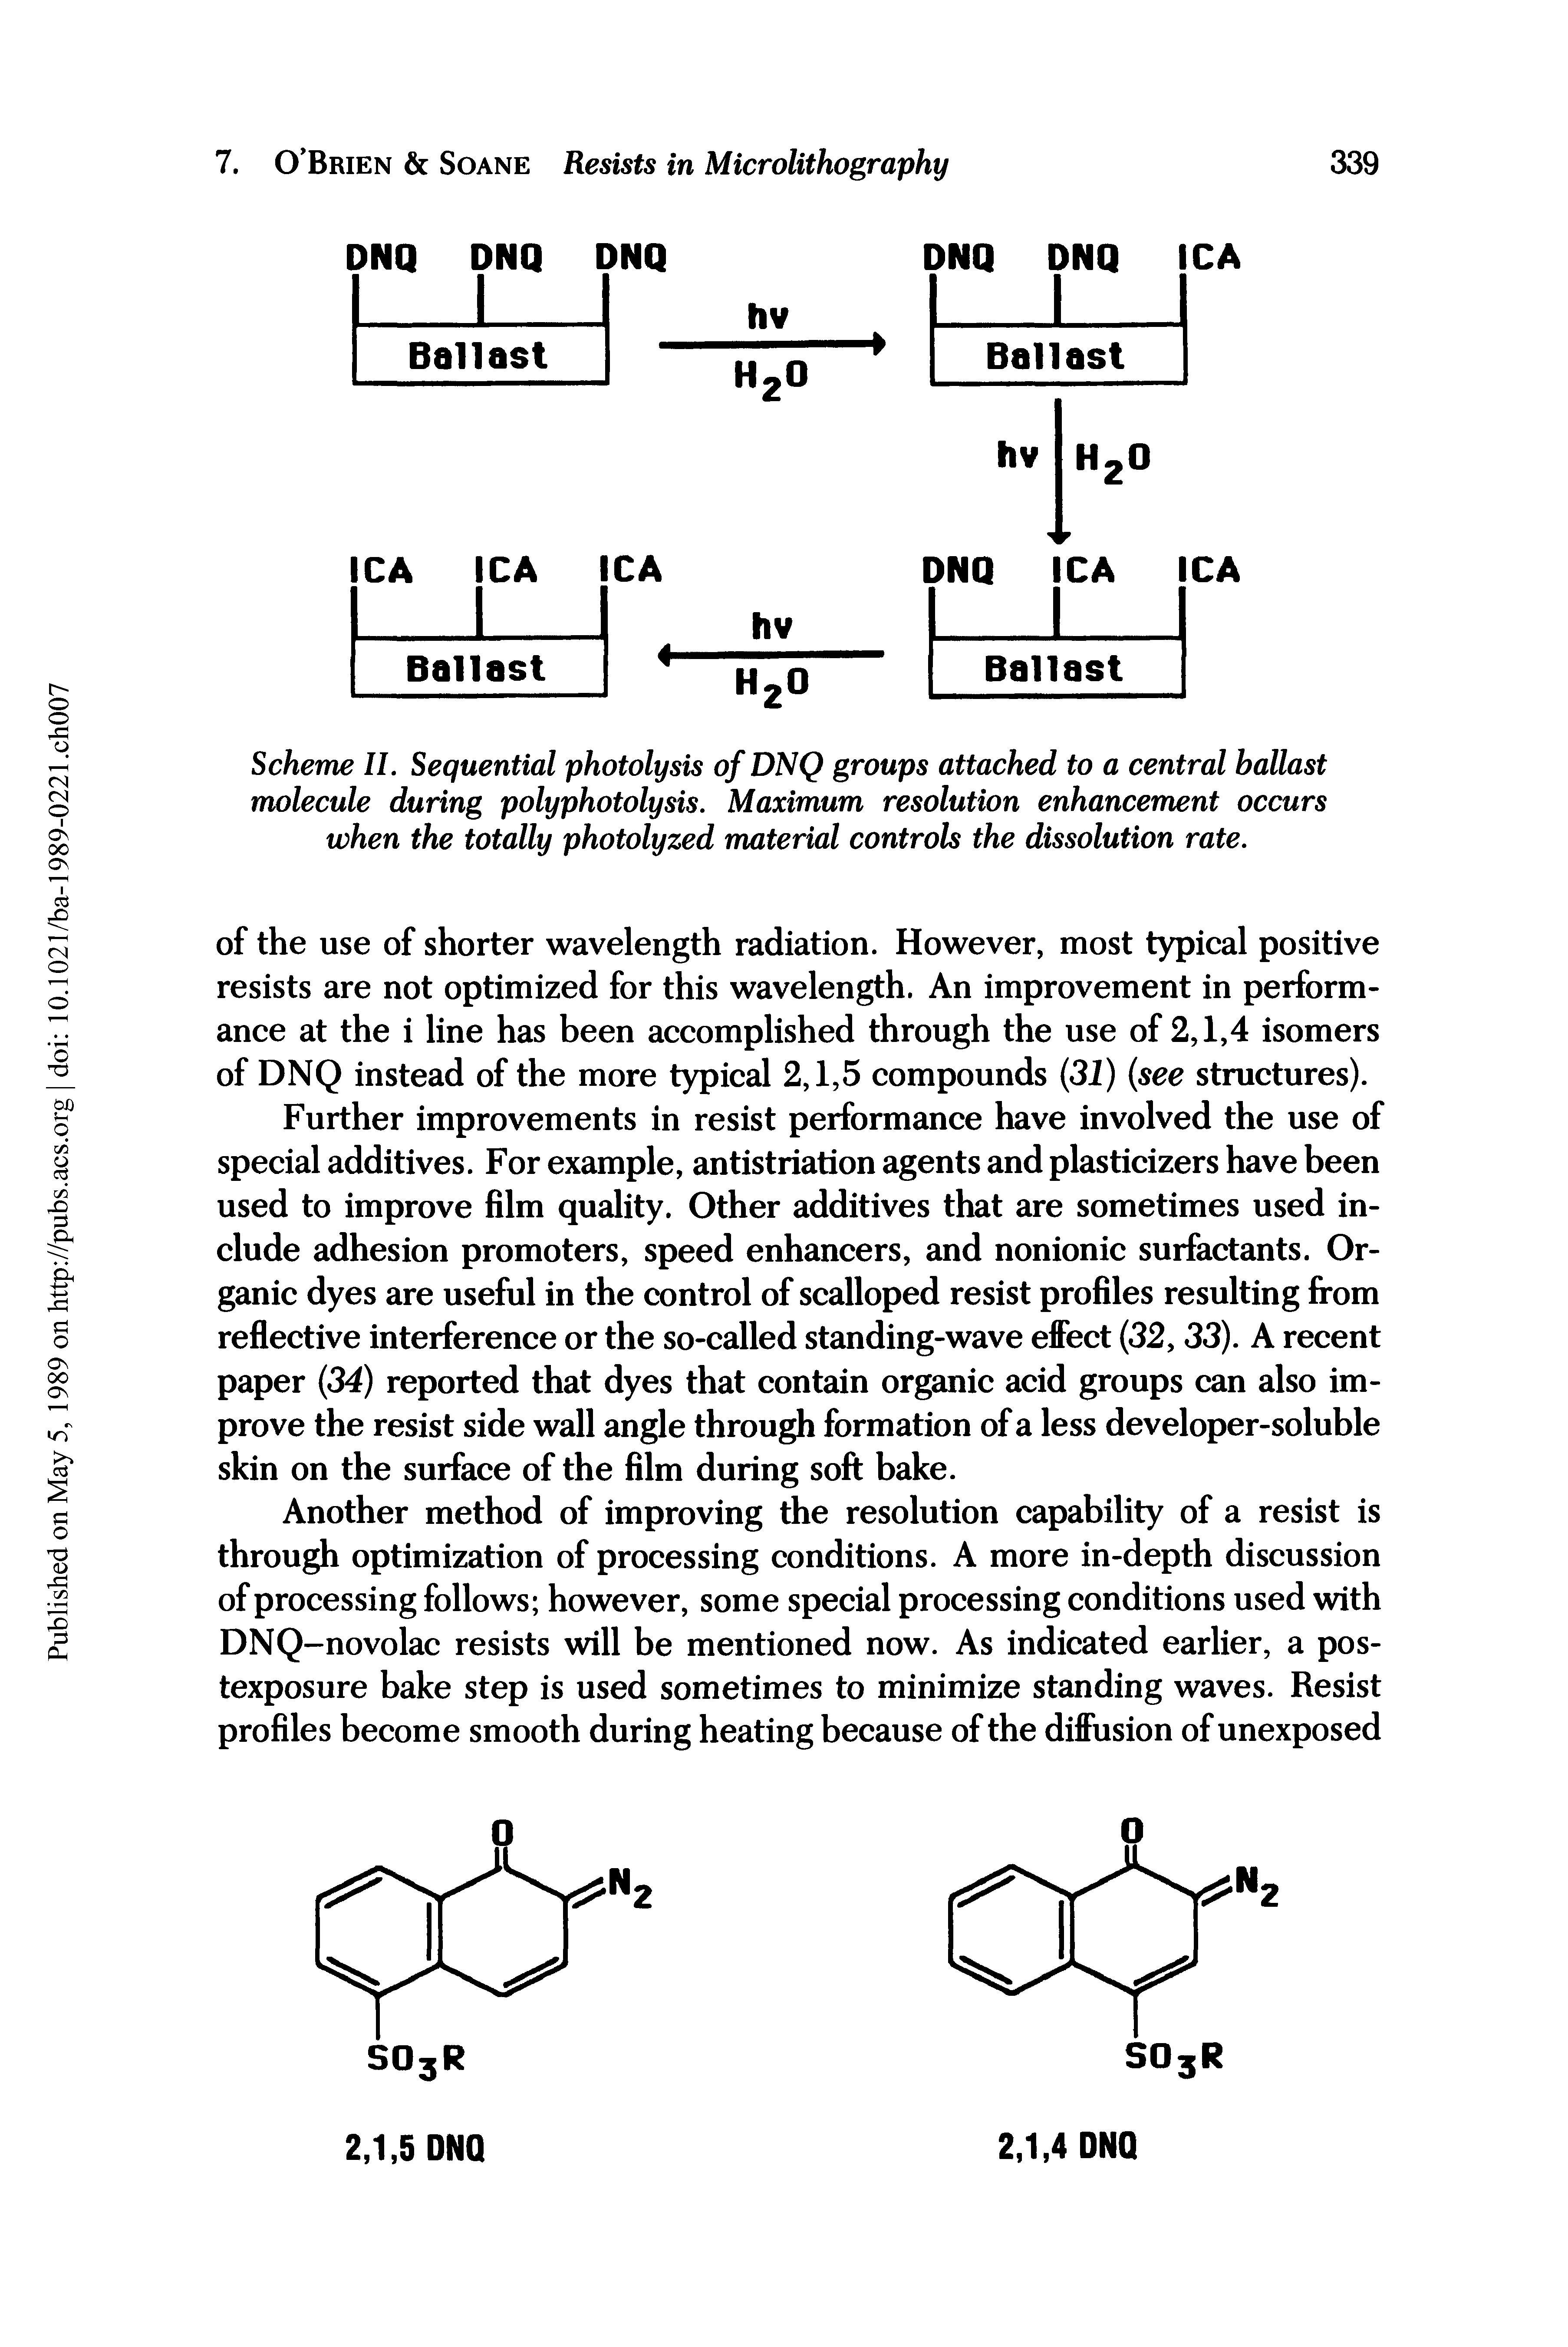 Scheme II. Sequential photolysis of DNQ groups attached to a central ballast molecule during polyphotolysis. Maximum resolution enhancement occurs when the totally photolyzed material controls the dissolution rate.